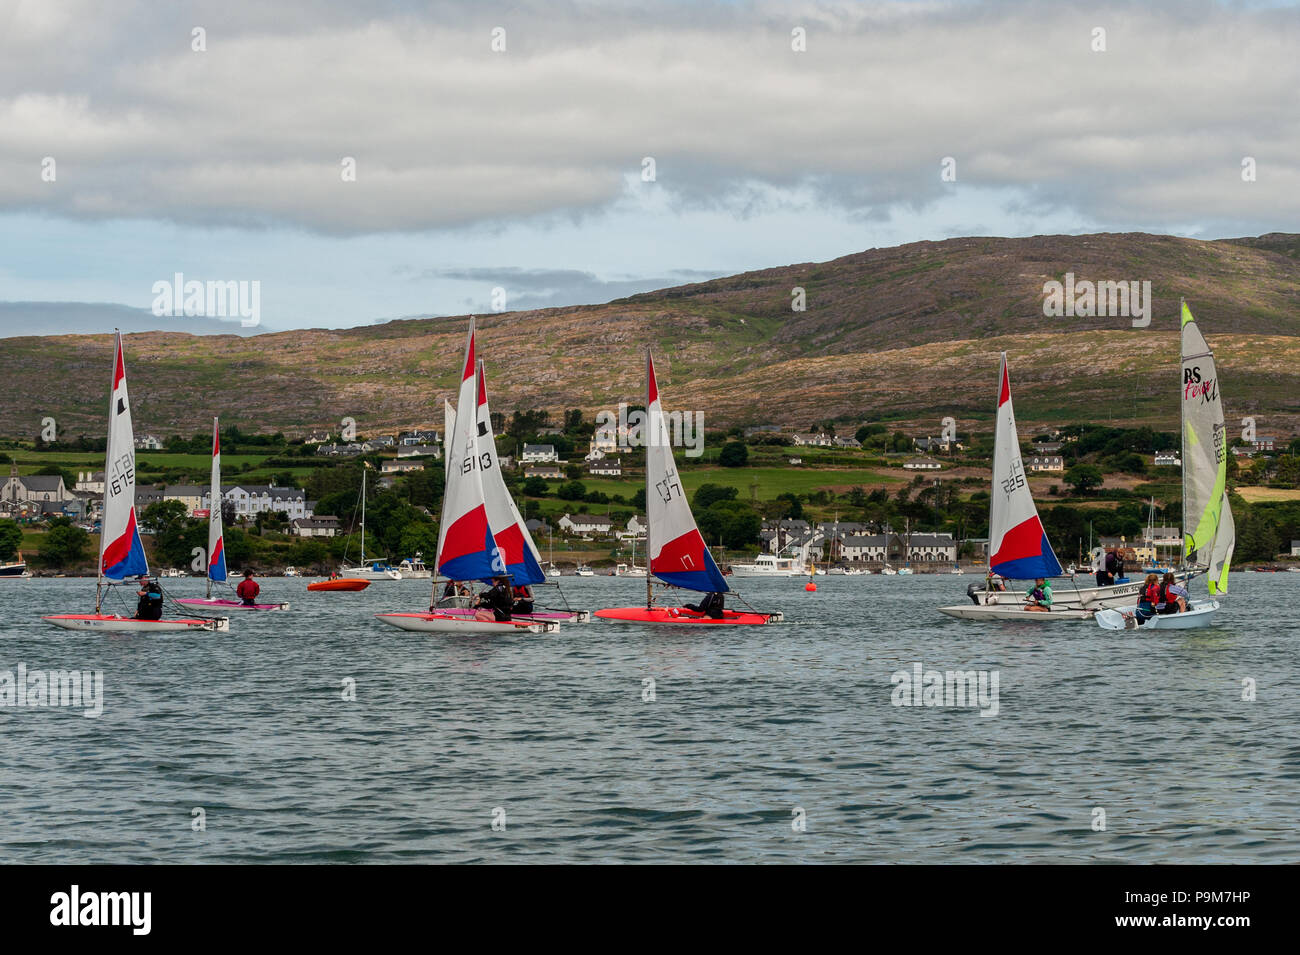 Schull, West Cork, Ireland. 19th July, 2018. Young people come from all over the island of Ireland, including the North, to take part in the schools regatta which is aimed at novice racing sailors. Credit: Andy Gibson/Alamy Live News. Stock Photo